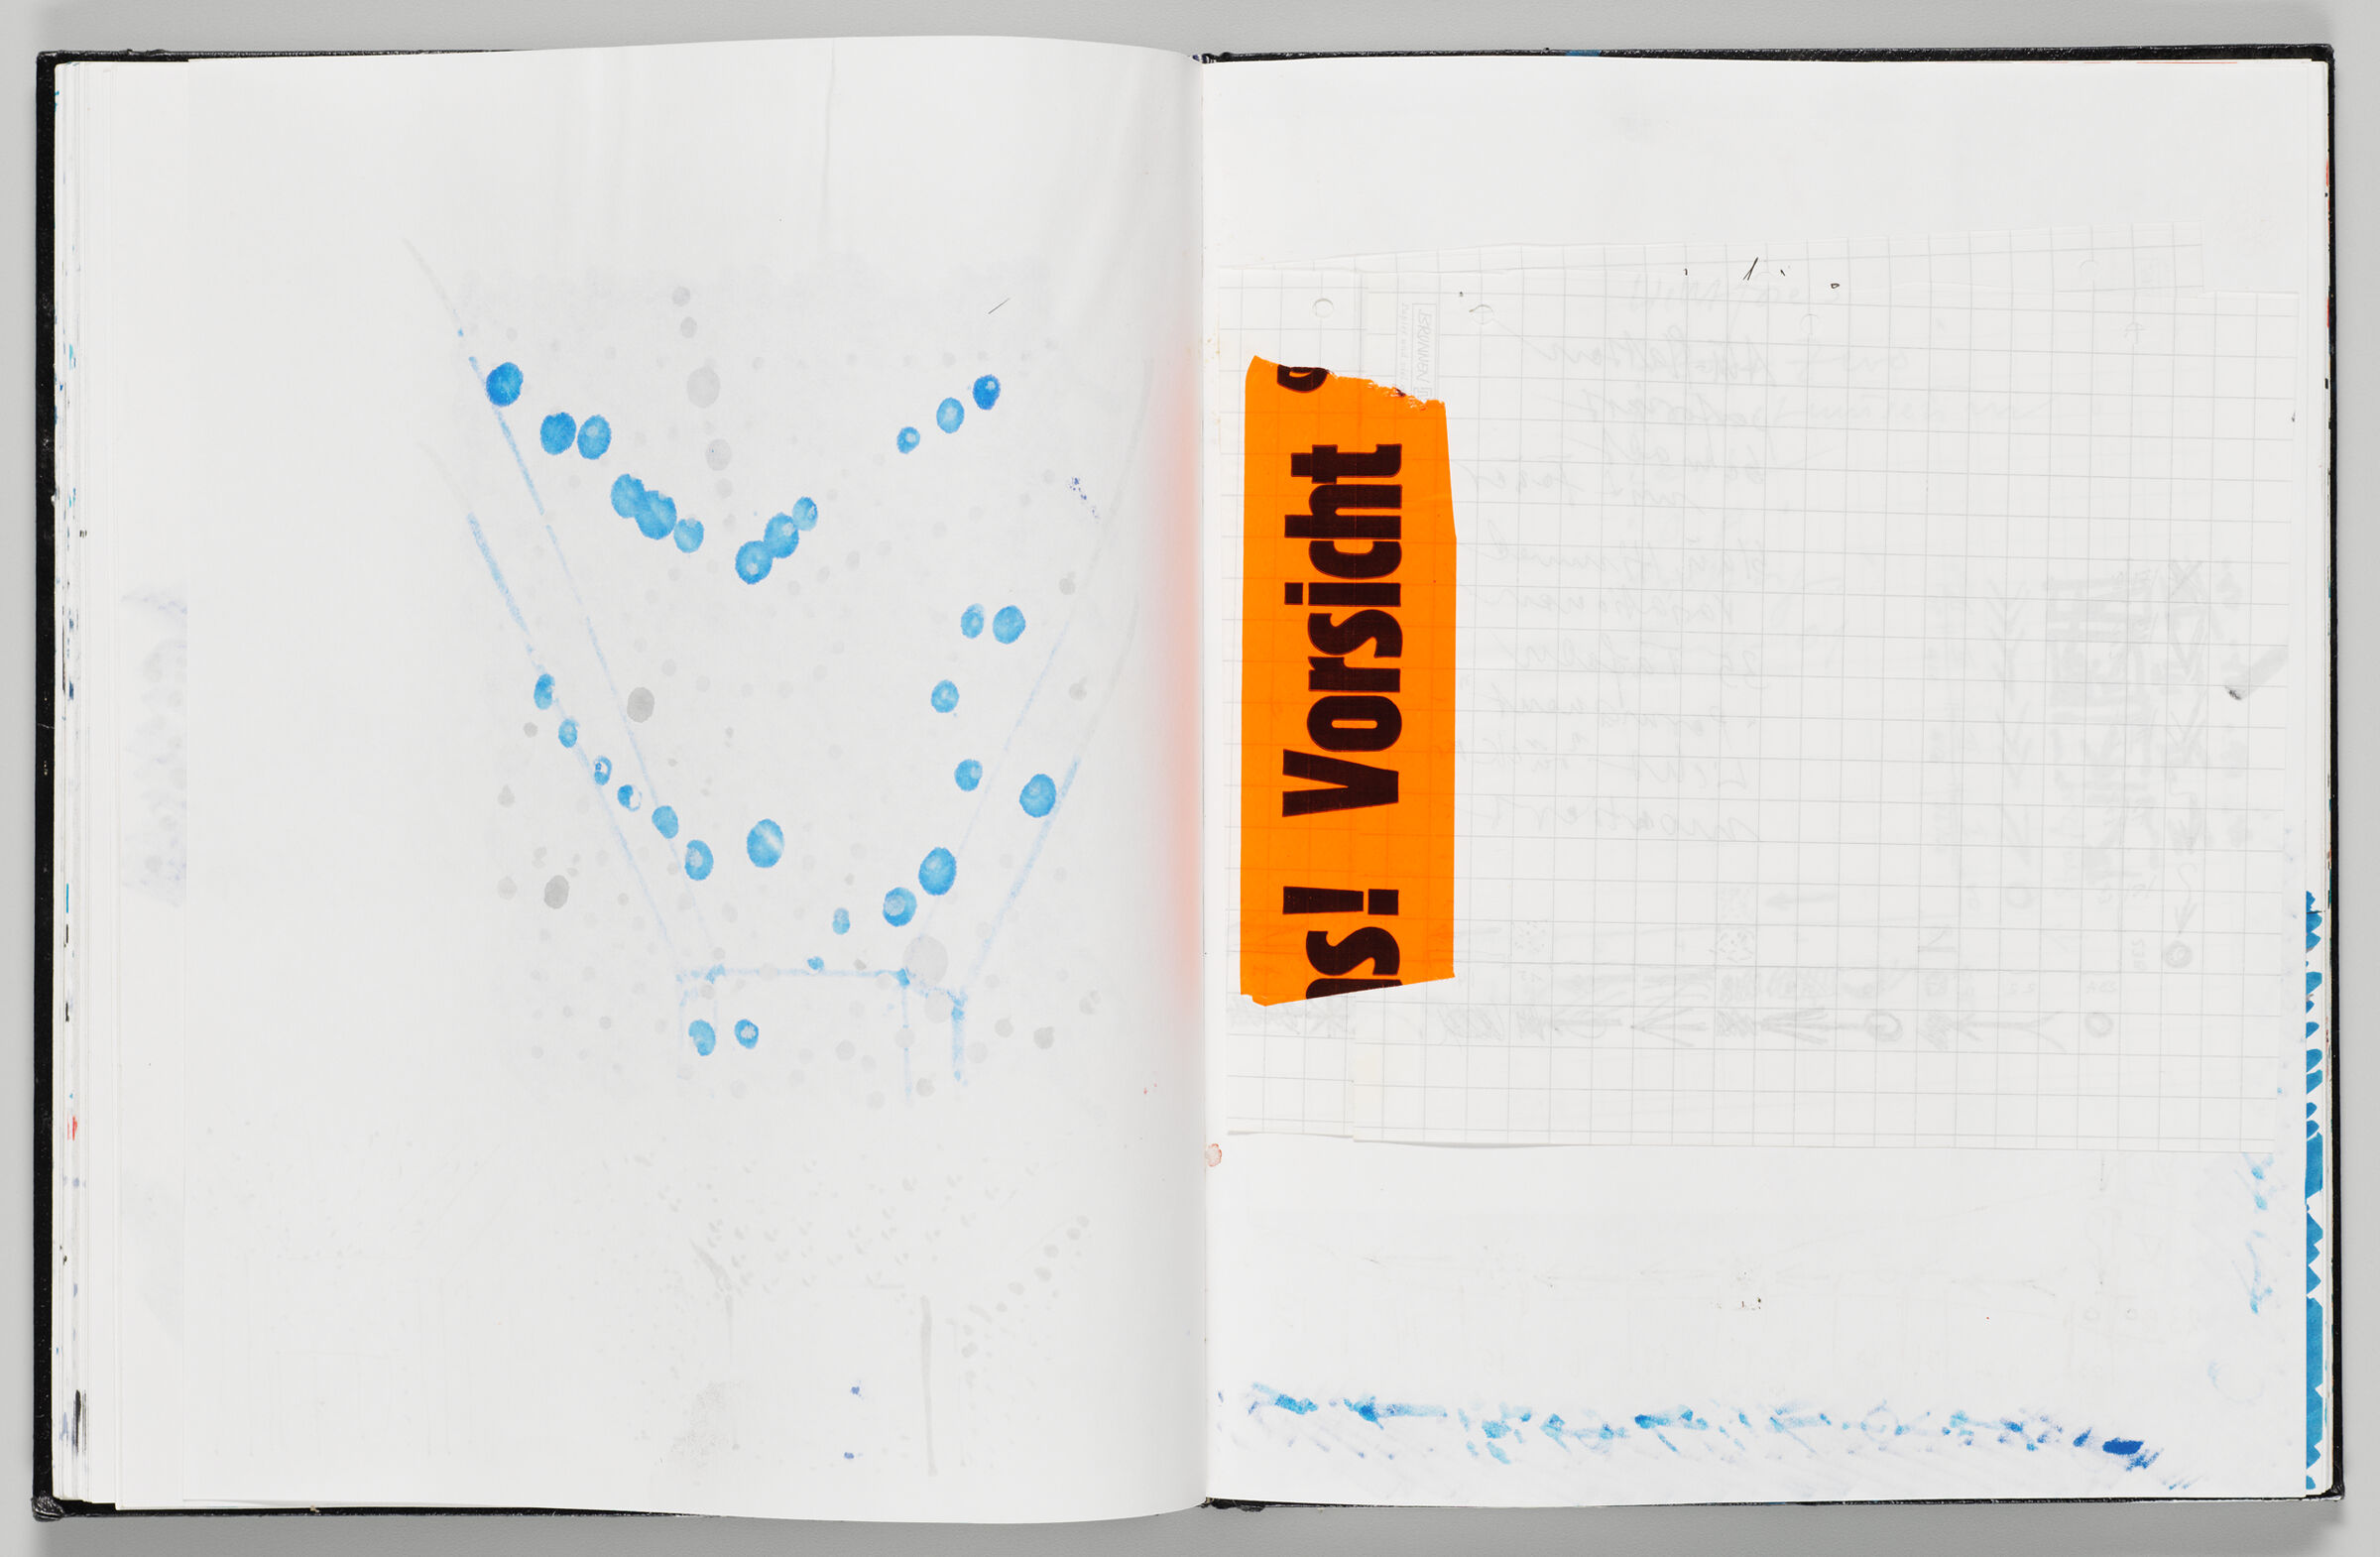 Untitled (Bleed-Through From Previous Page, Left Page); Untitled (Paper Fragment, Right Page)